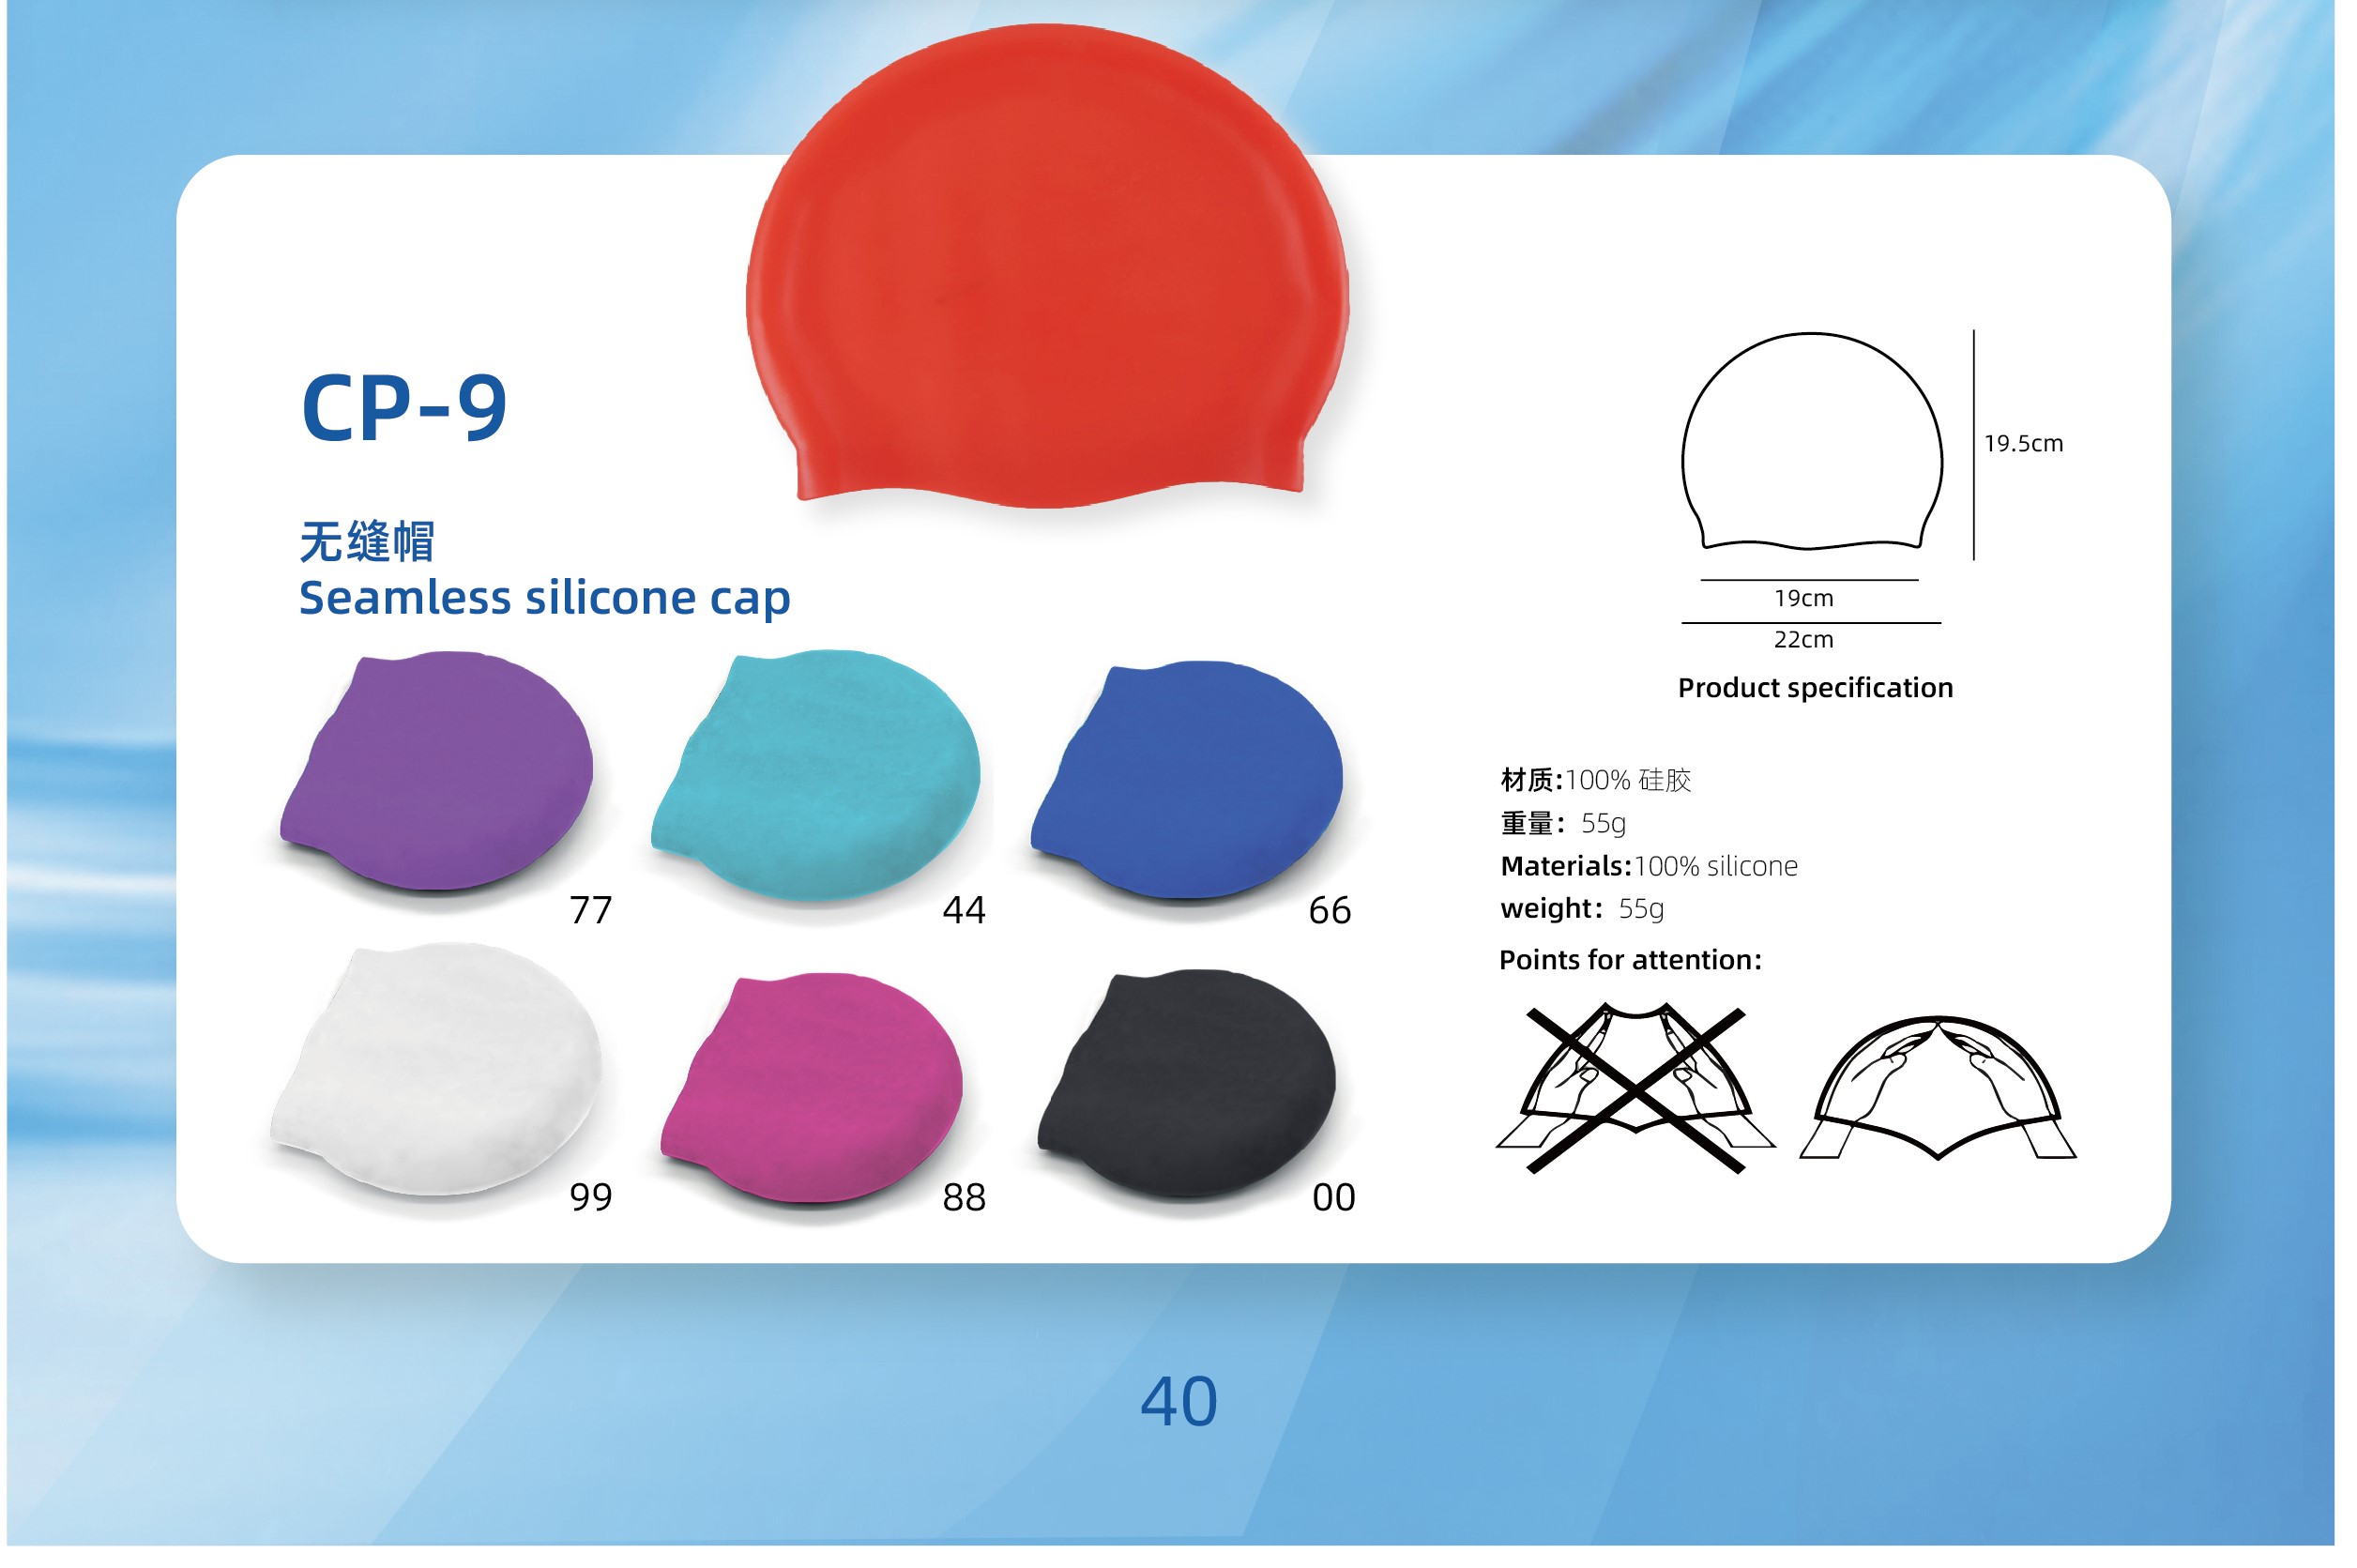 SD High quality silicone swimming cap for adult soft unisex free sample CP-9 seamless swimming hats  